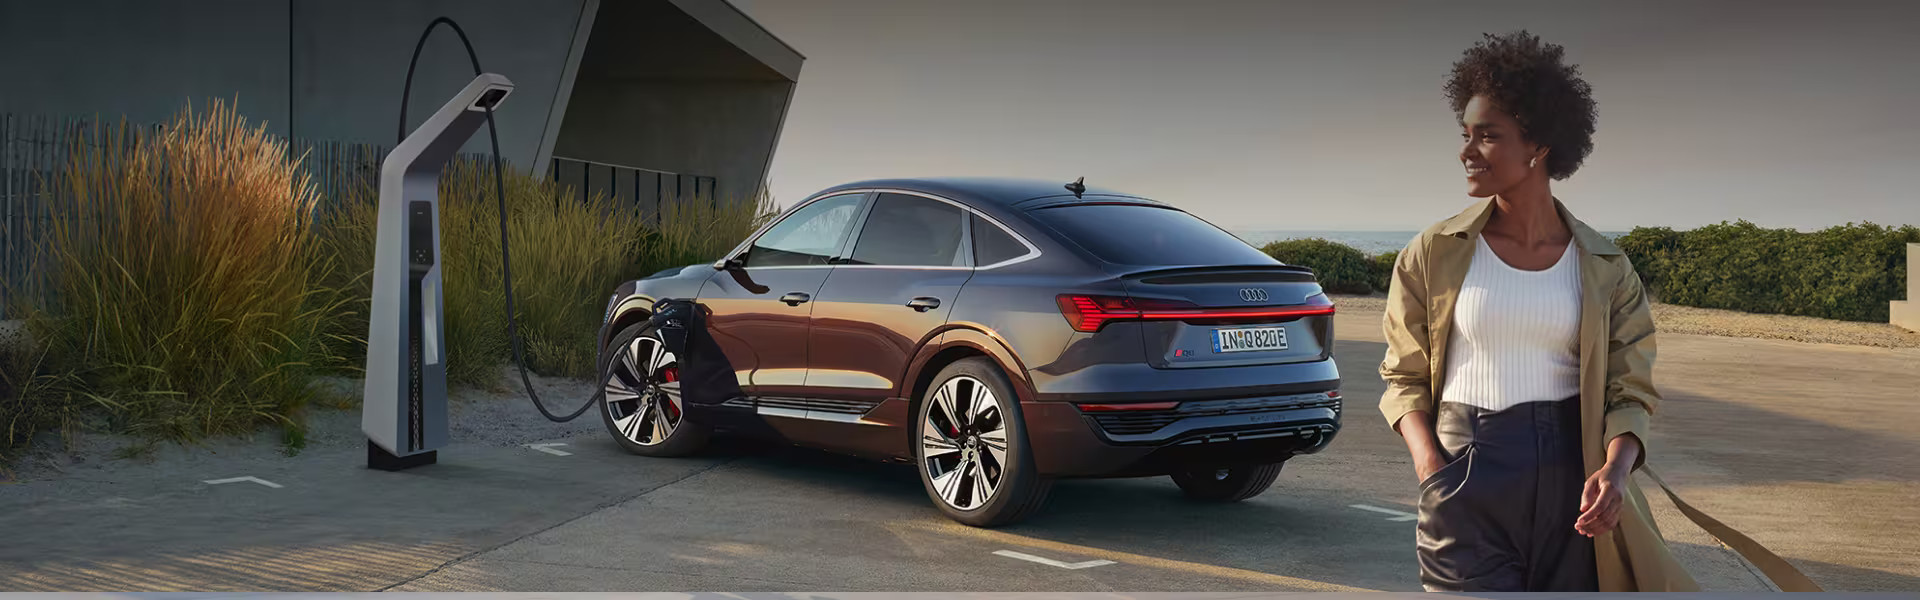 Audi Q8 e-tron Sportback parked up and charging